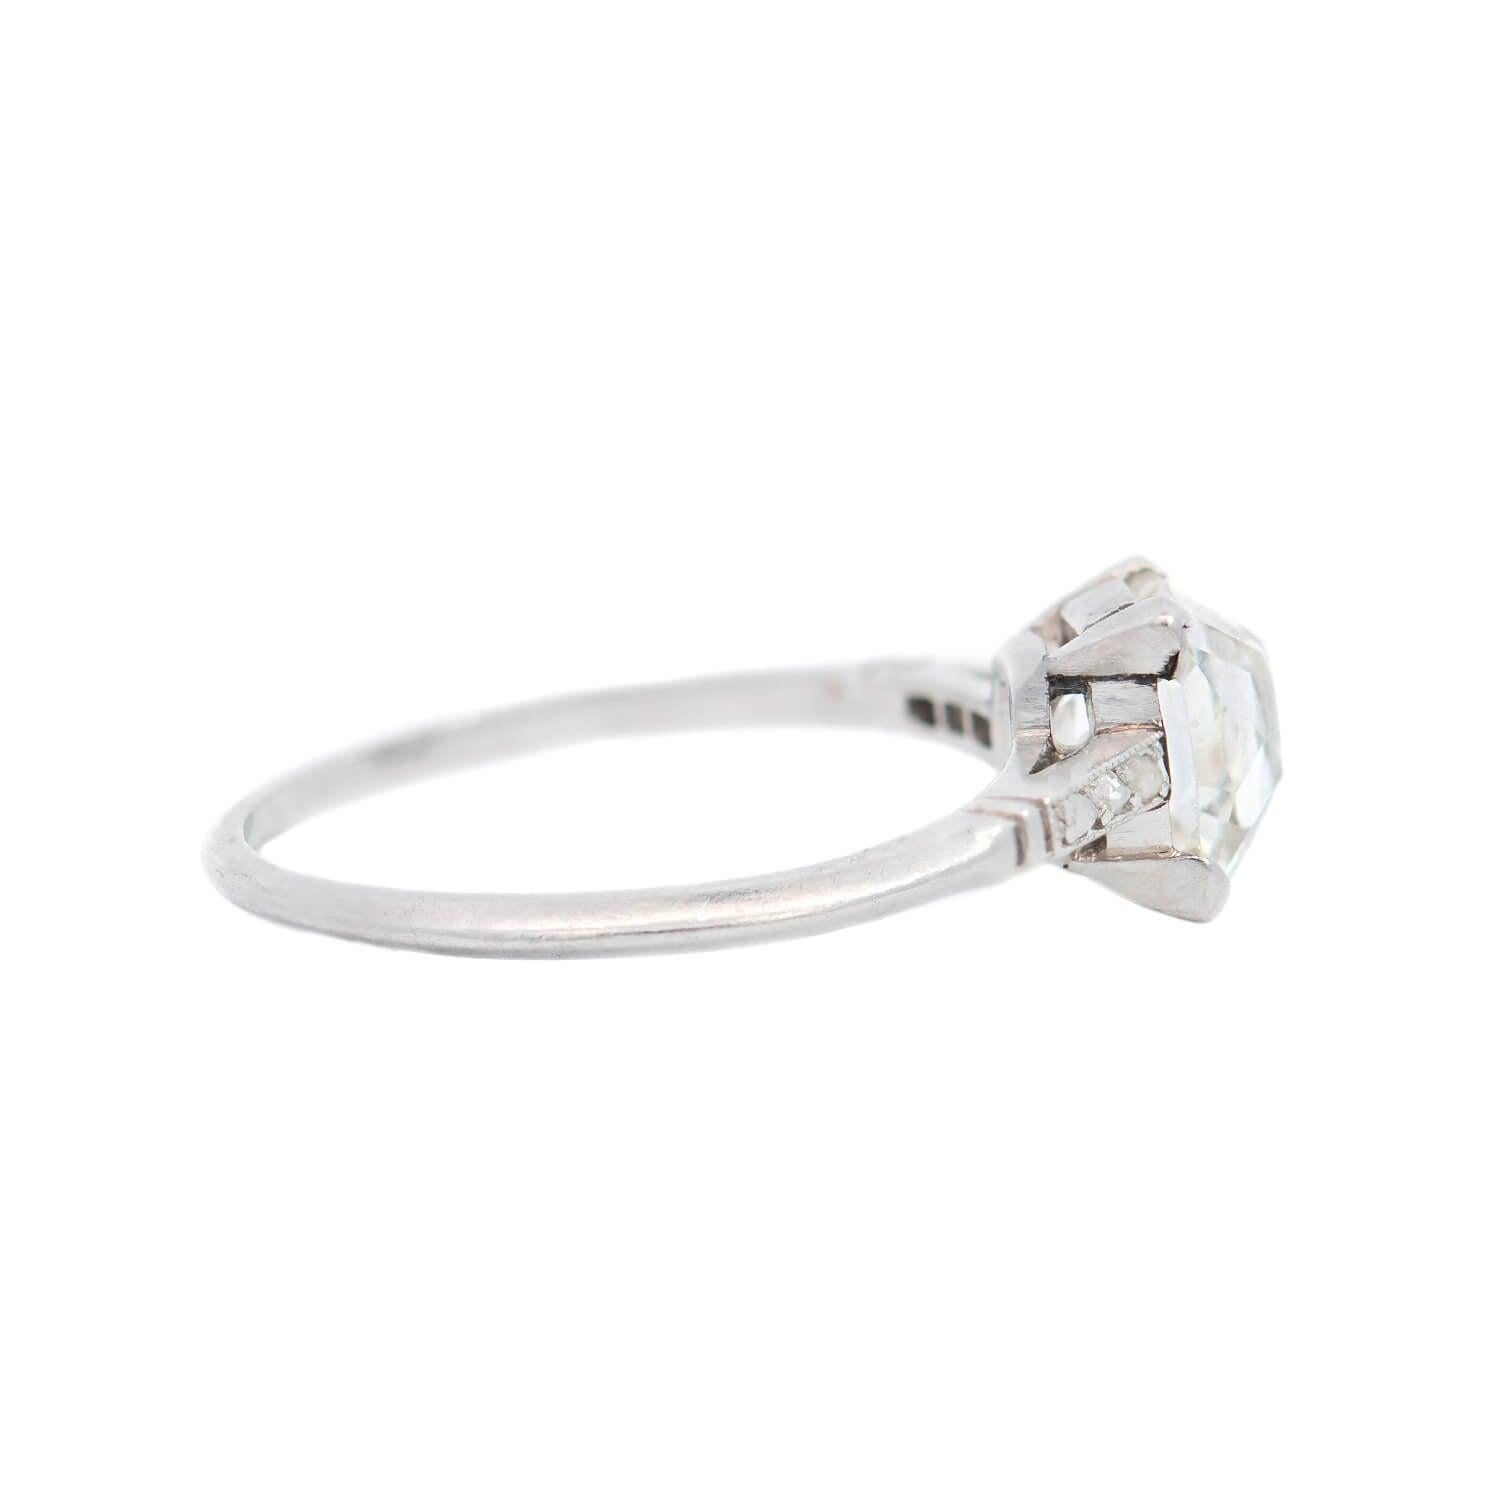 Late Edwardian Platinum Rare Peruzzi Cut Diamond Ring 1.10ct In Good Condition For Sale In Narberth, PA